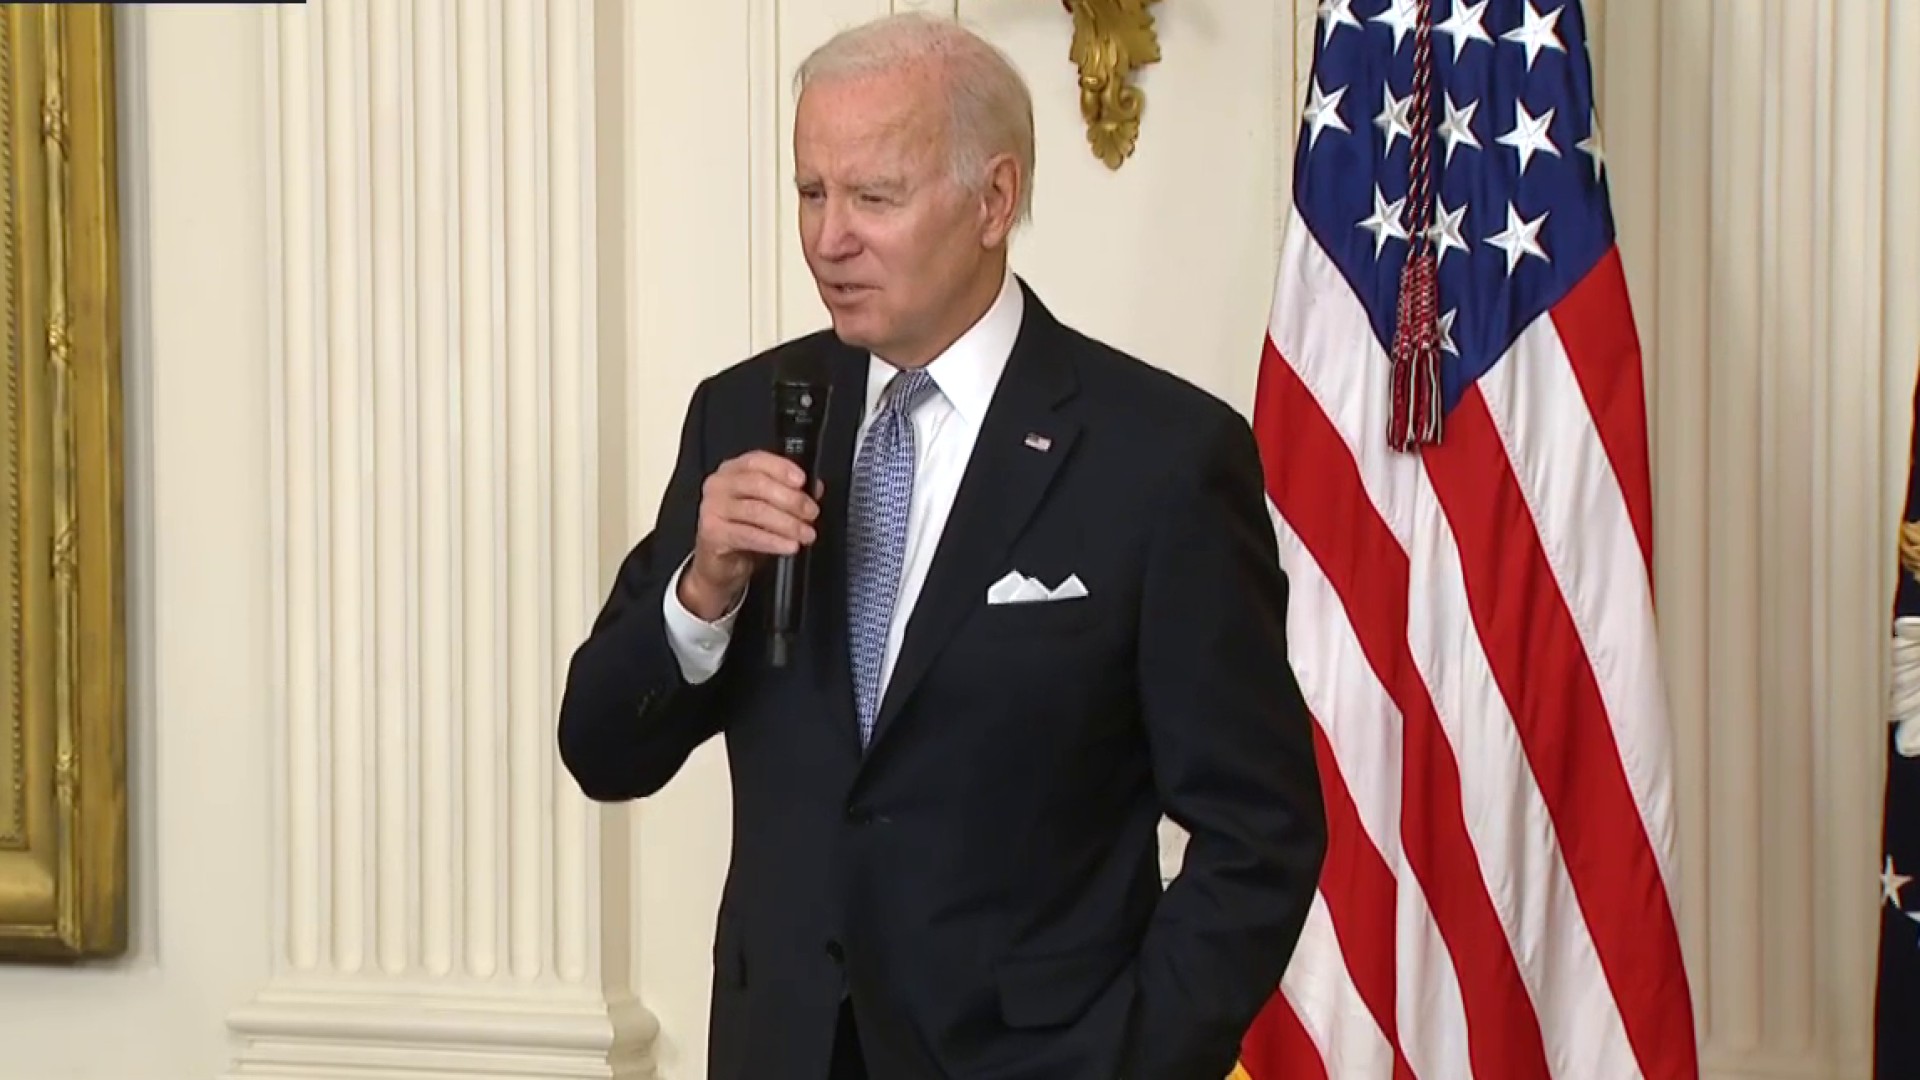 Biden administration persists in providing crucial support (Credits: NBC News)